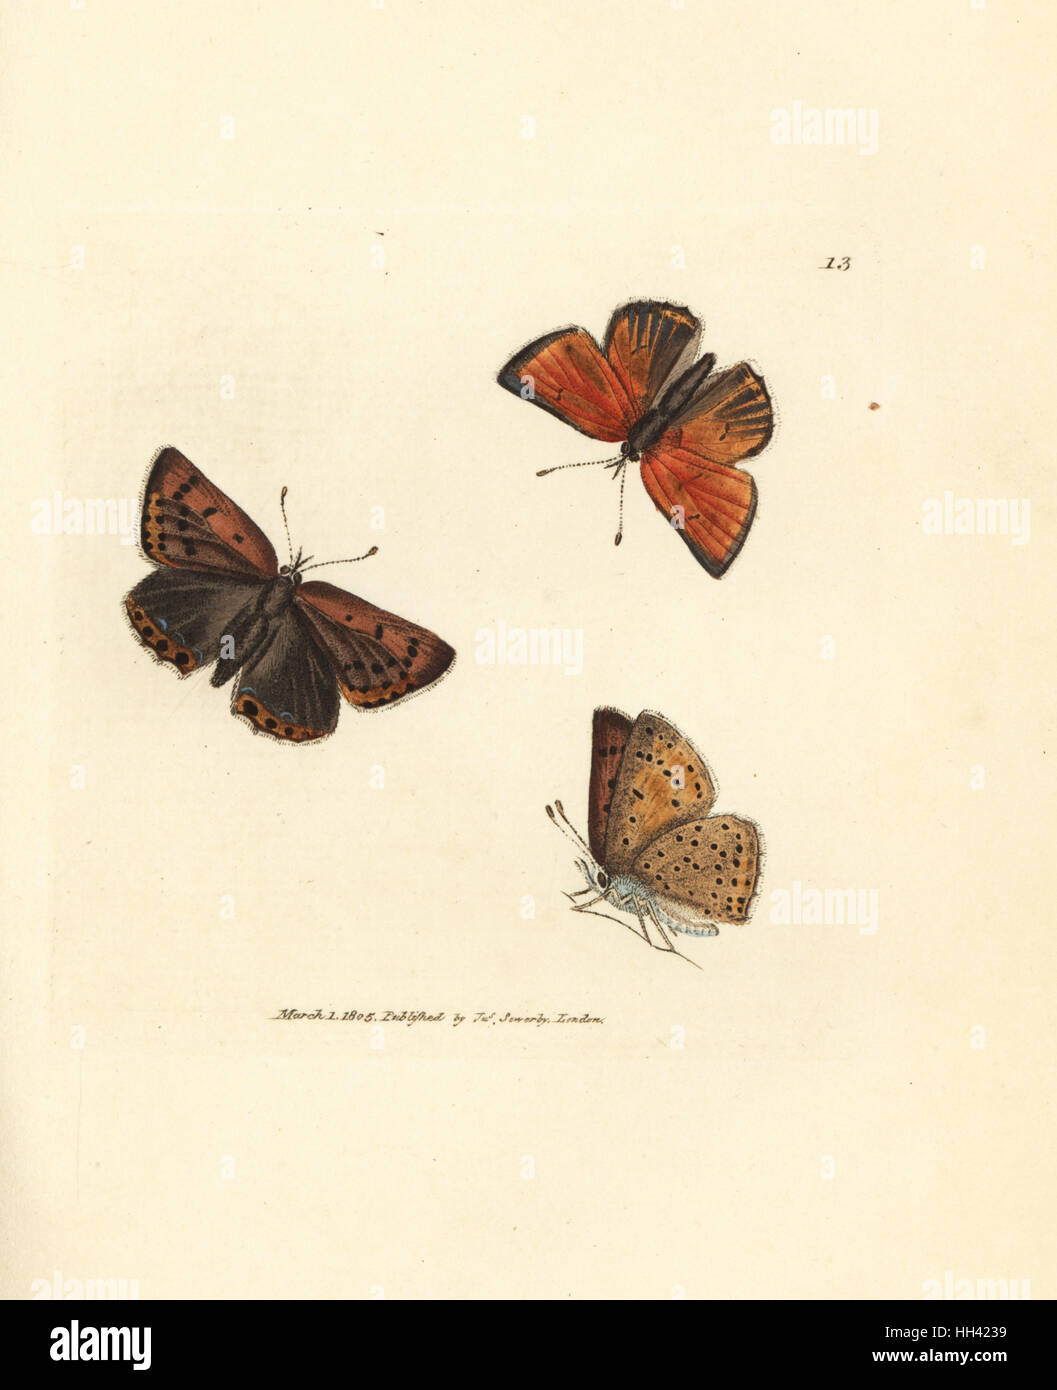 Purple-edged copper butterfly, Lycaena hippothoe. Handcoloured copperplate engraving by James Sowerby from The British Miscellany, or Coloured figures of new, rare, or little known animal subjects, London, 1804. Stock Photo